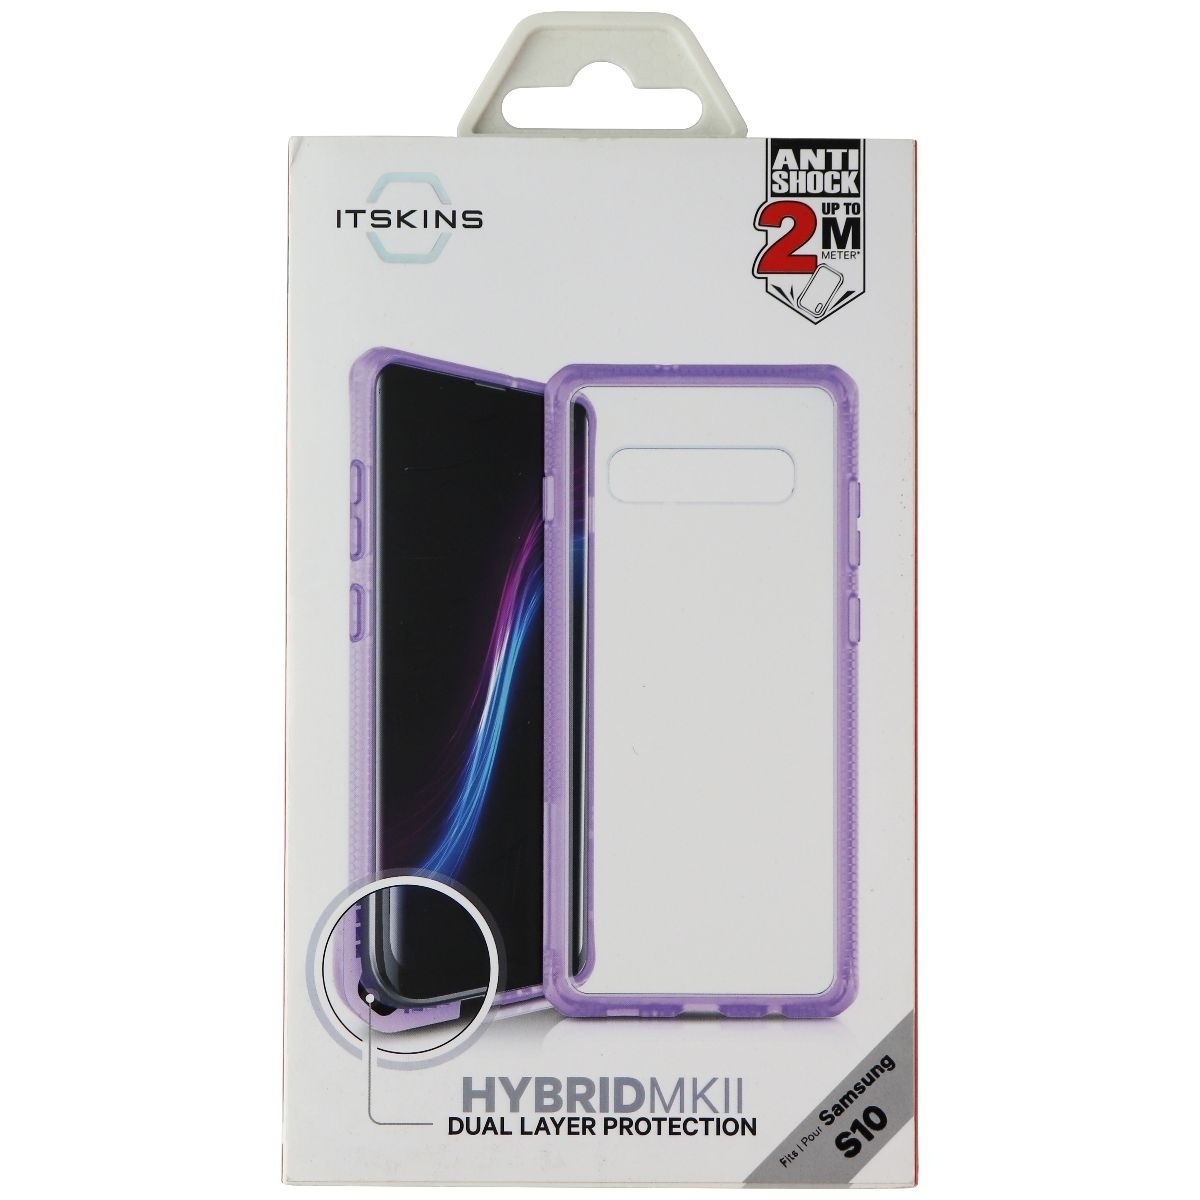 ITSKINS Hybrid Frost Series Case For Samsung Galaxy S10 - Light Purple/Clear